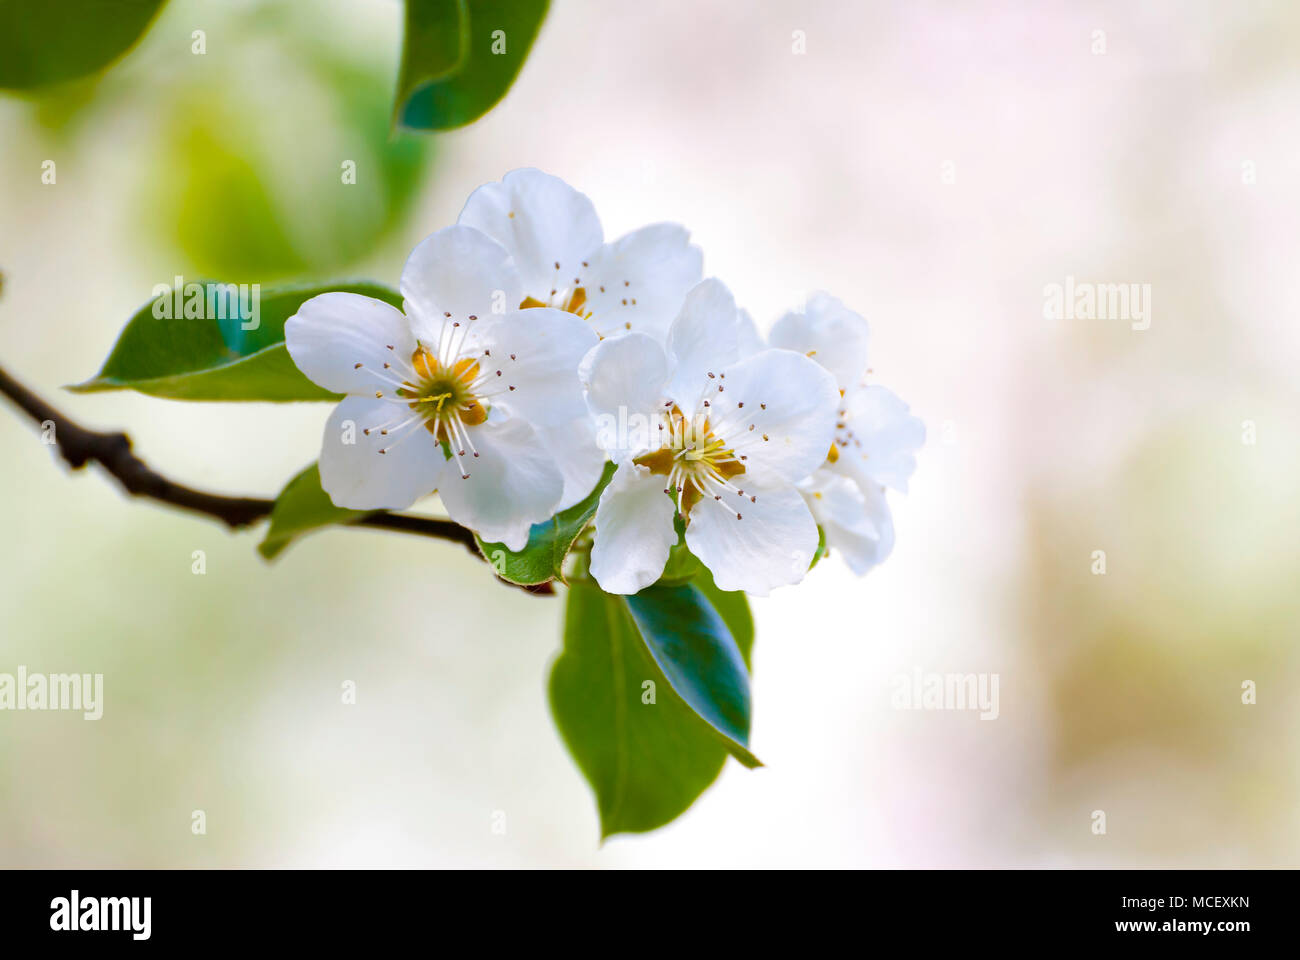 Branch of white spring blossom in soft focus. Stock Photo